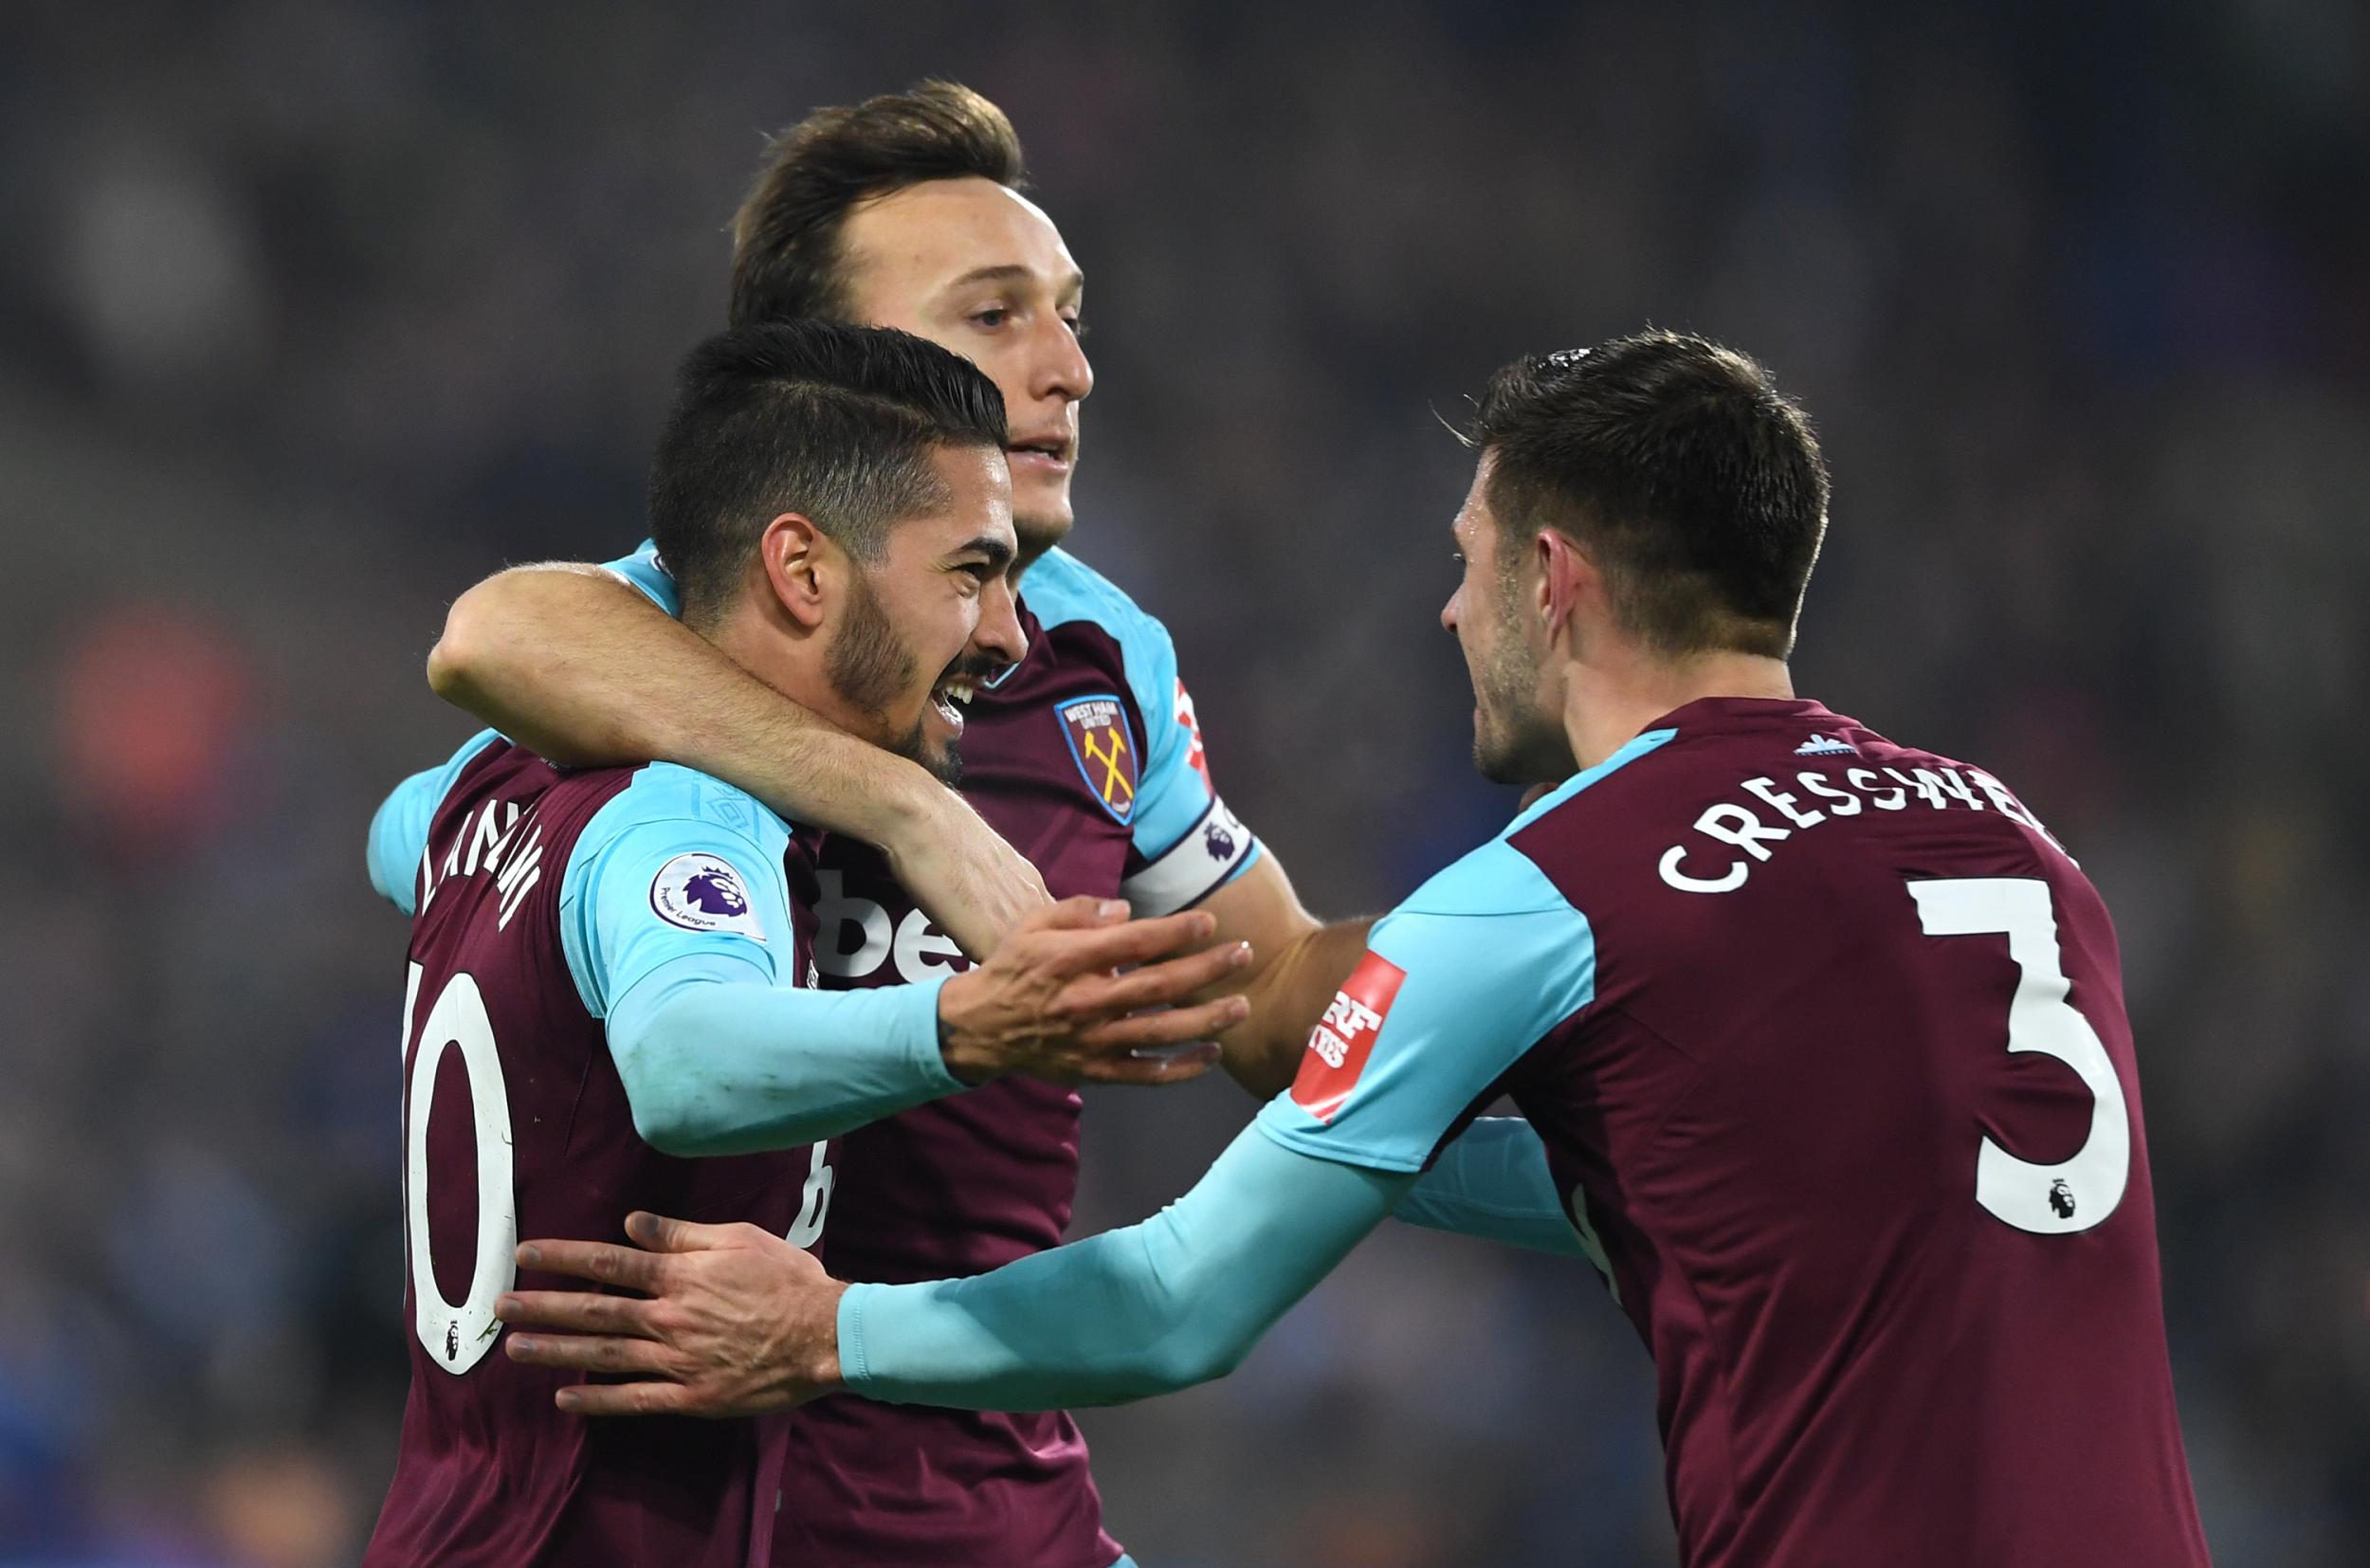 Manuel Lanzini scored twice as West Ham saw off Huddersfield with ease